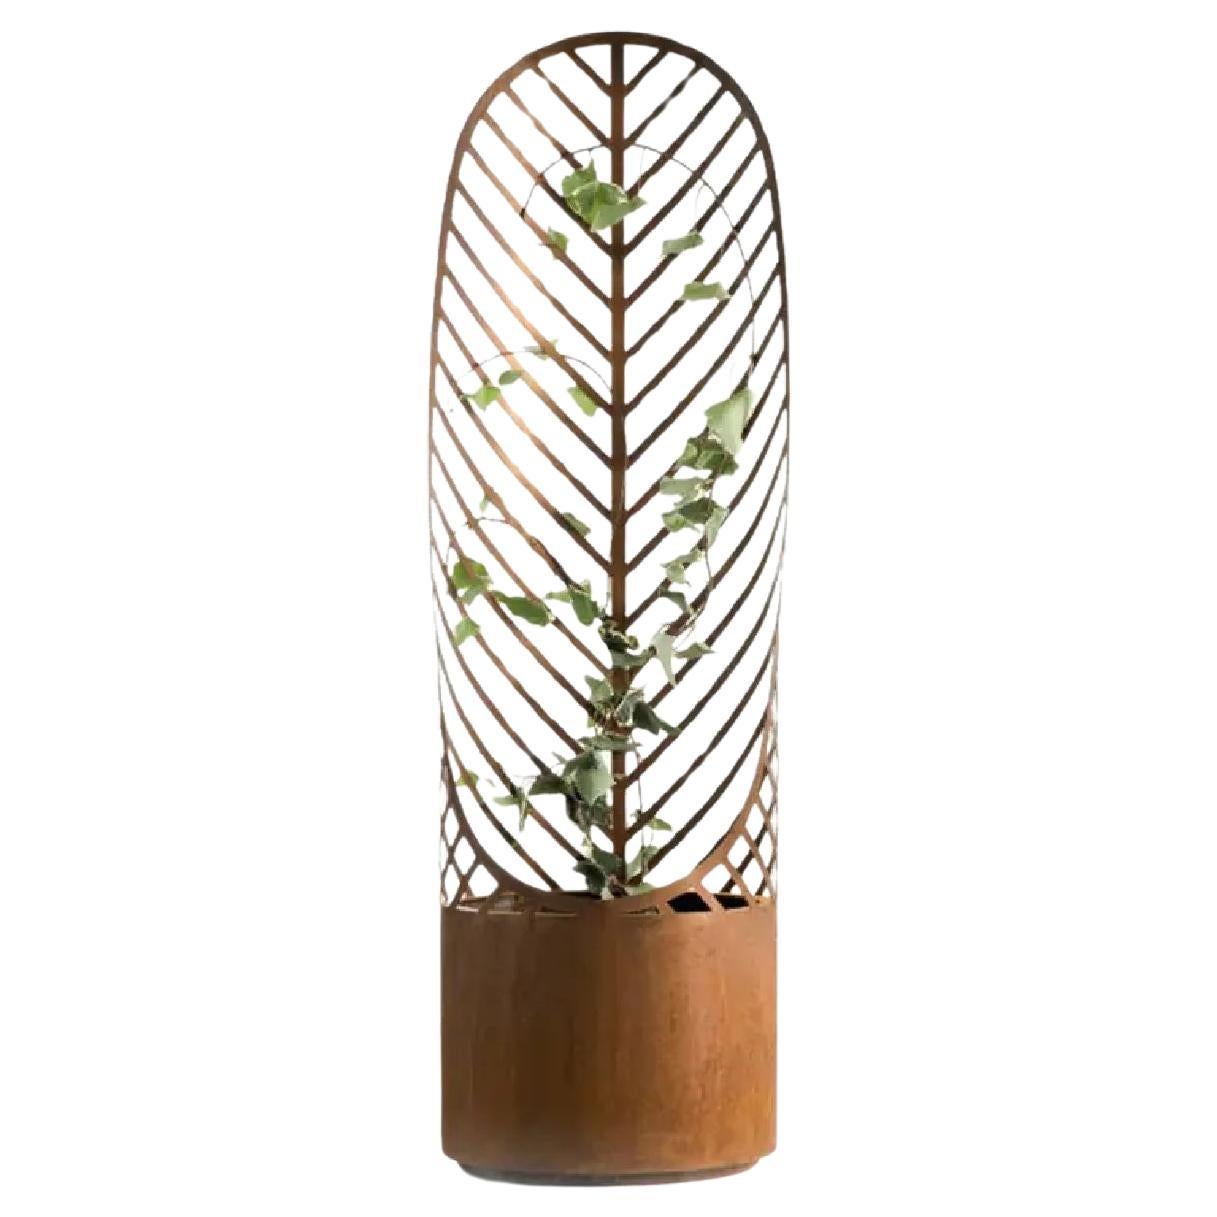 DeCastelli Screen-Pot 1 Planter in Corten Waxed by Francois Clerc For Sale